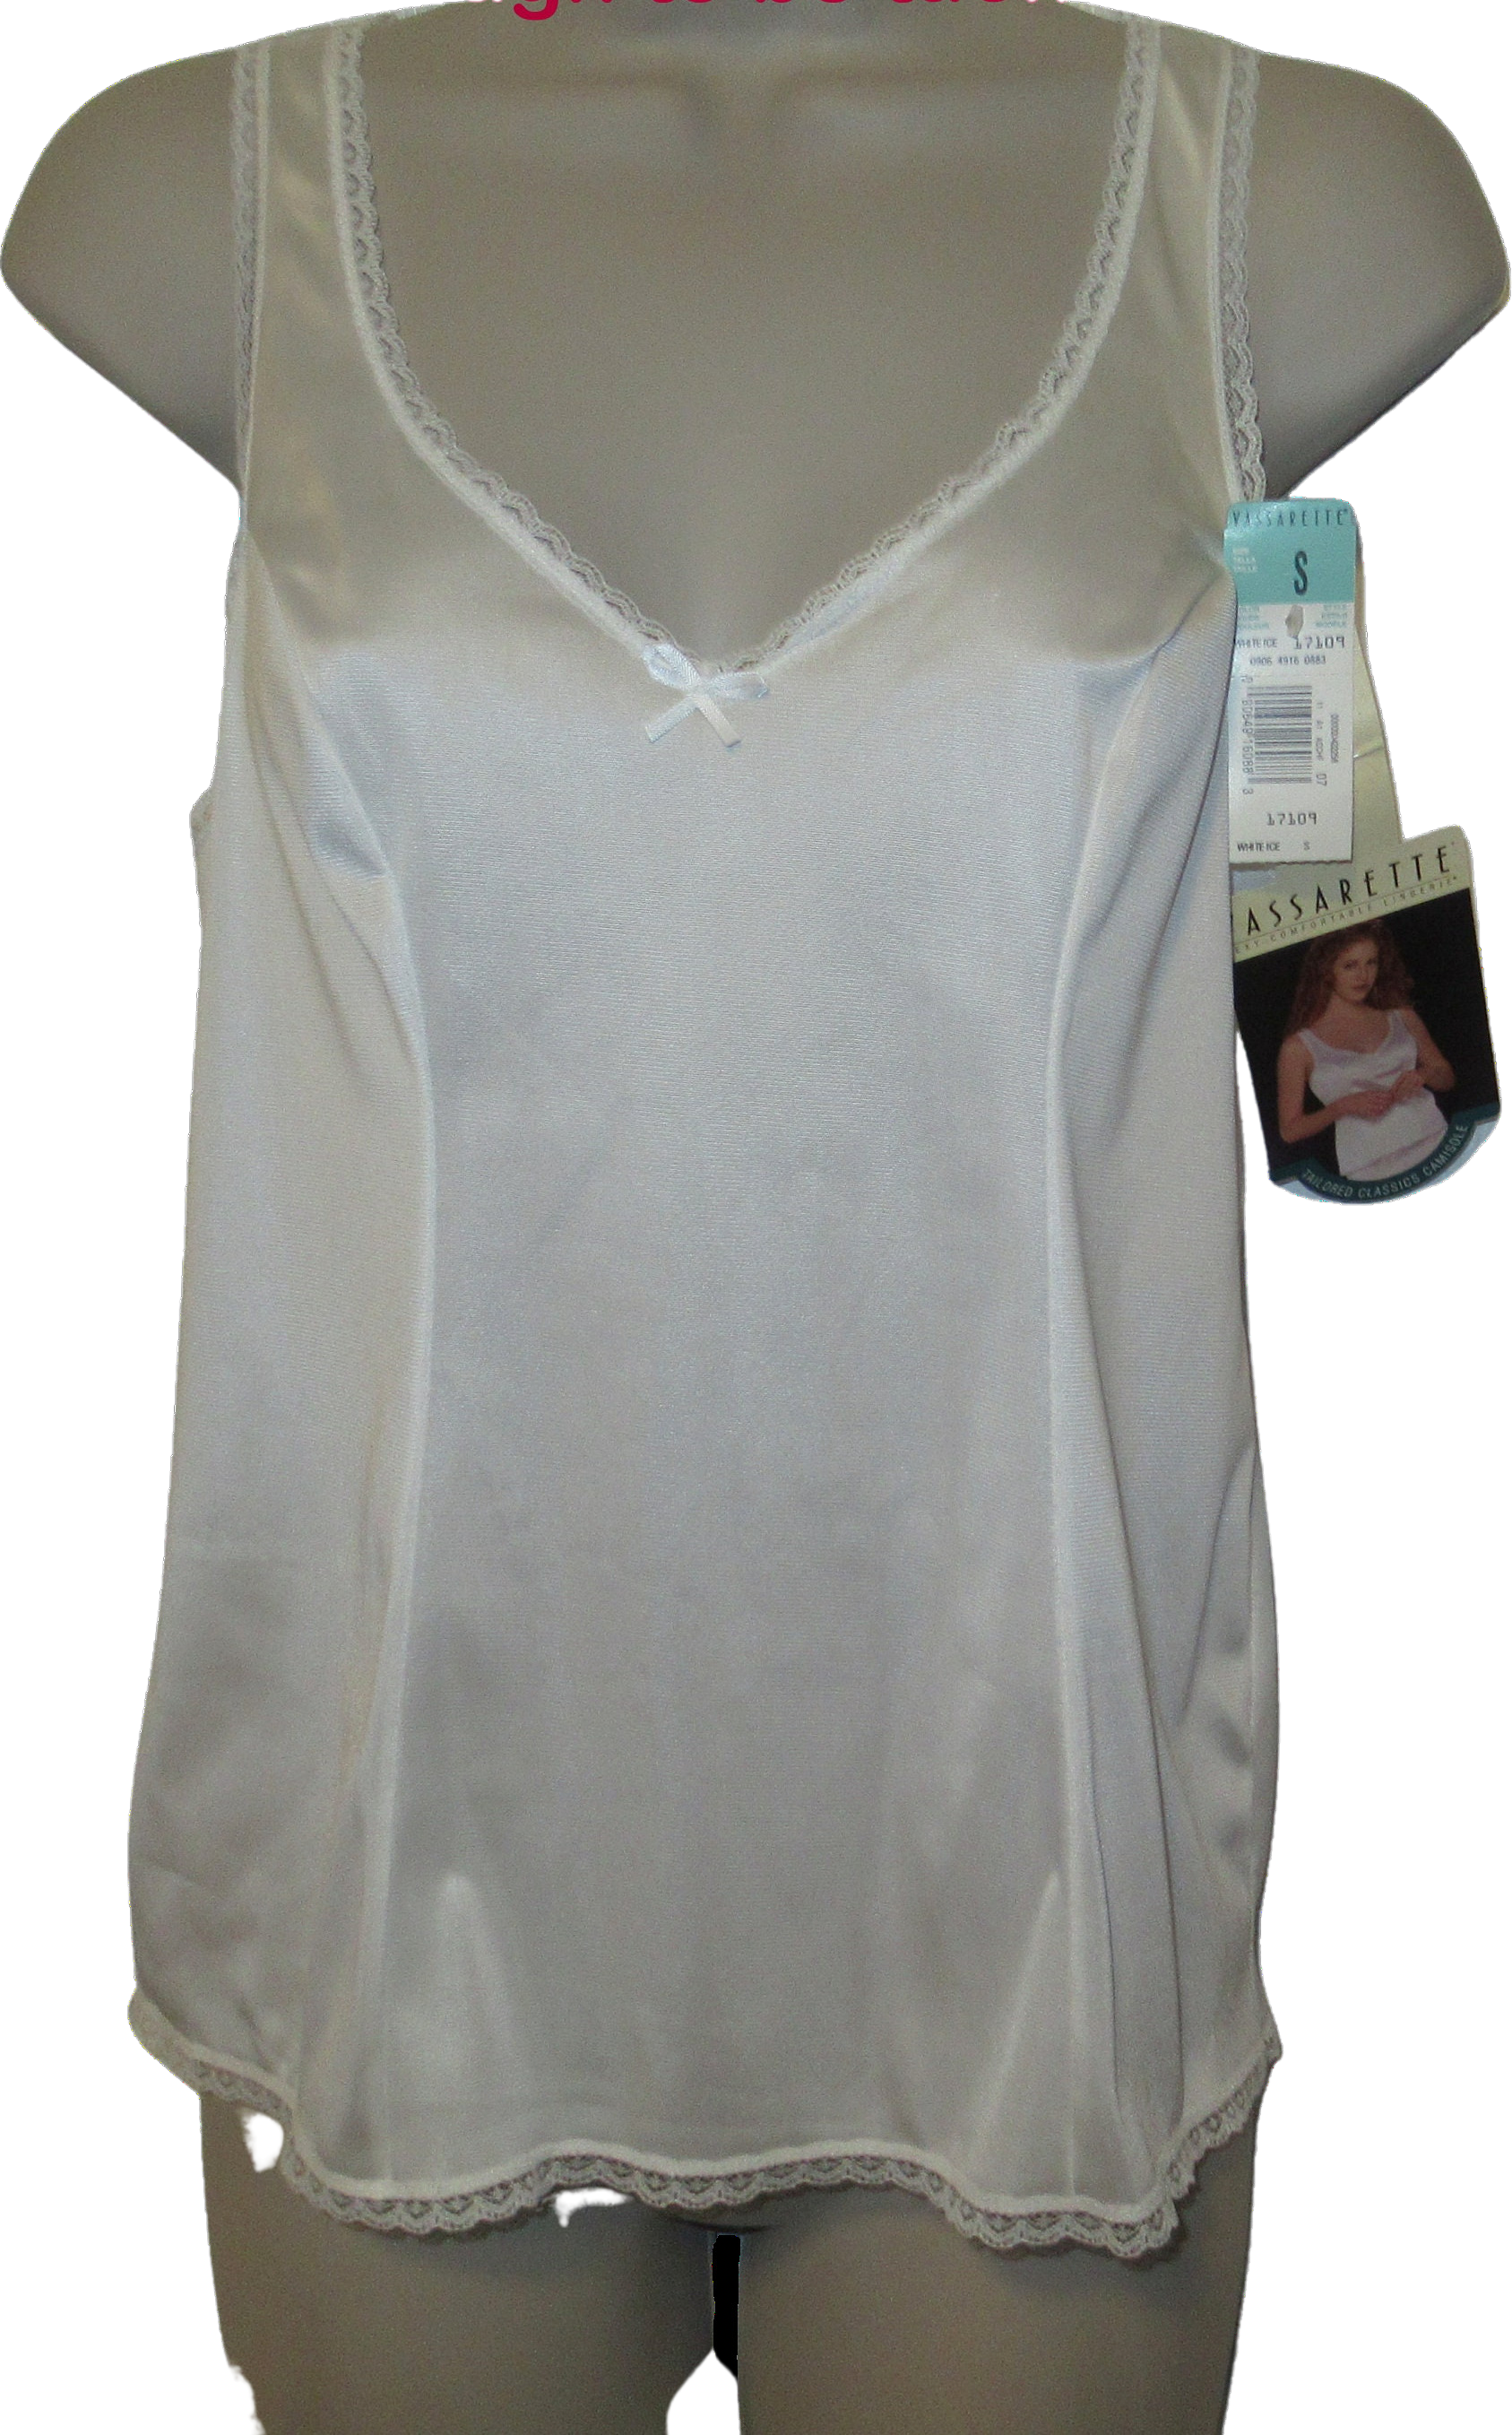 http://shopthrilling.com/cdn/shop/products/vassarette-camisole-bright-white-nylon-lace-trim-s-attached-style-is-called-white-ice-vintage-charm-by-vassarette-product-image__exRM3N.png?v=1666719502